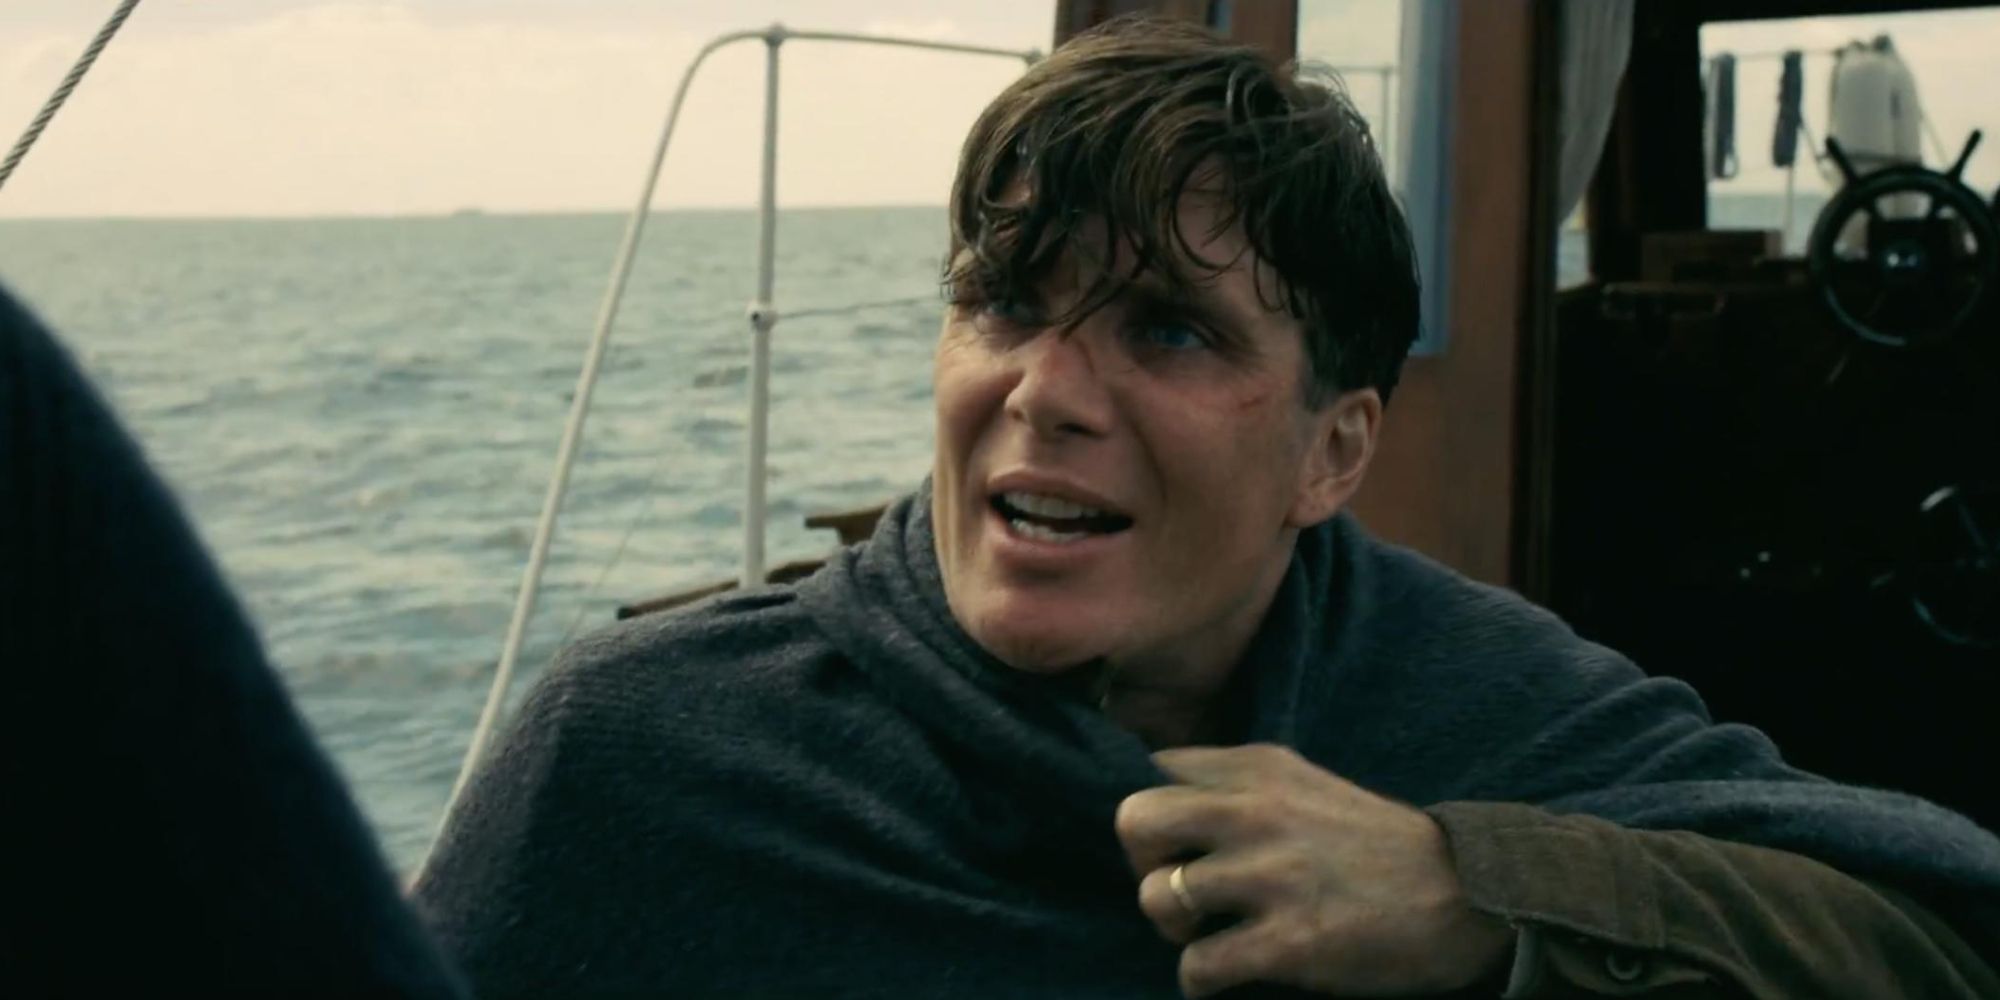 Cillian Murphy as the shivering soldier in Dunkirk